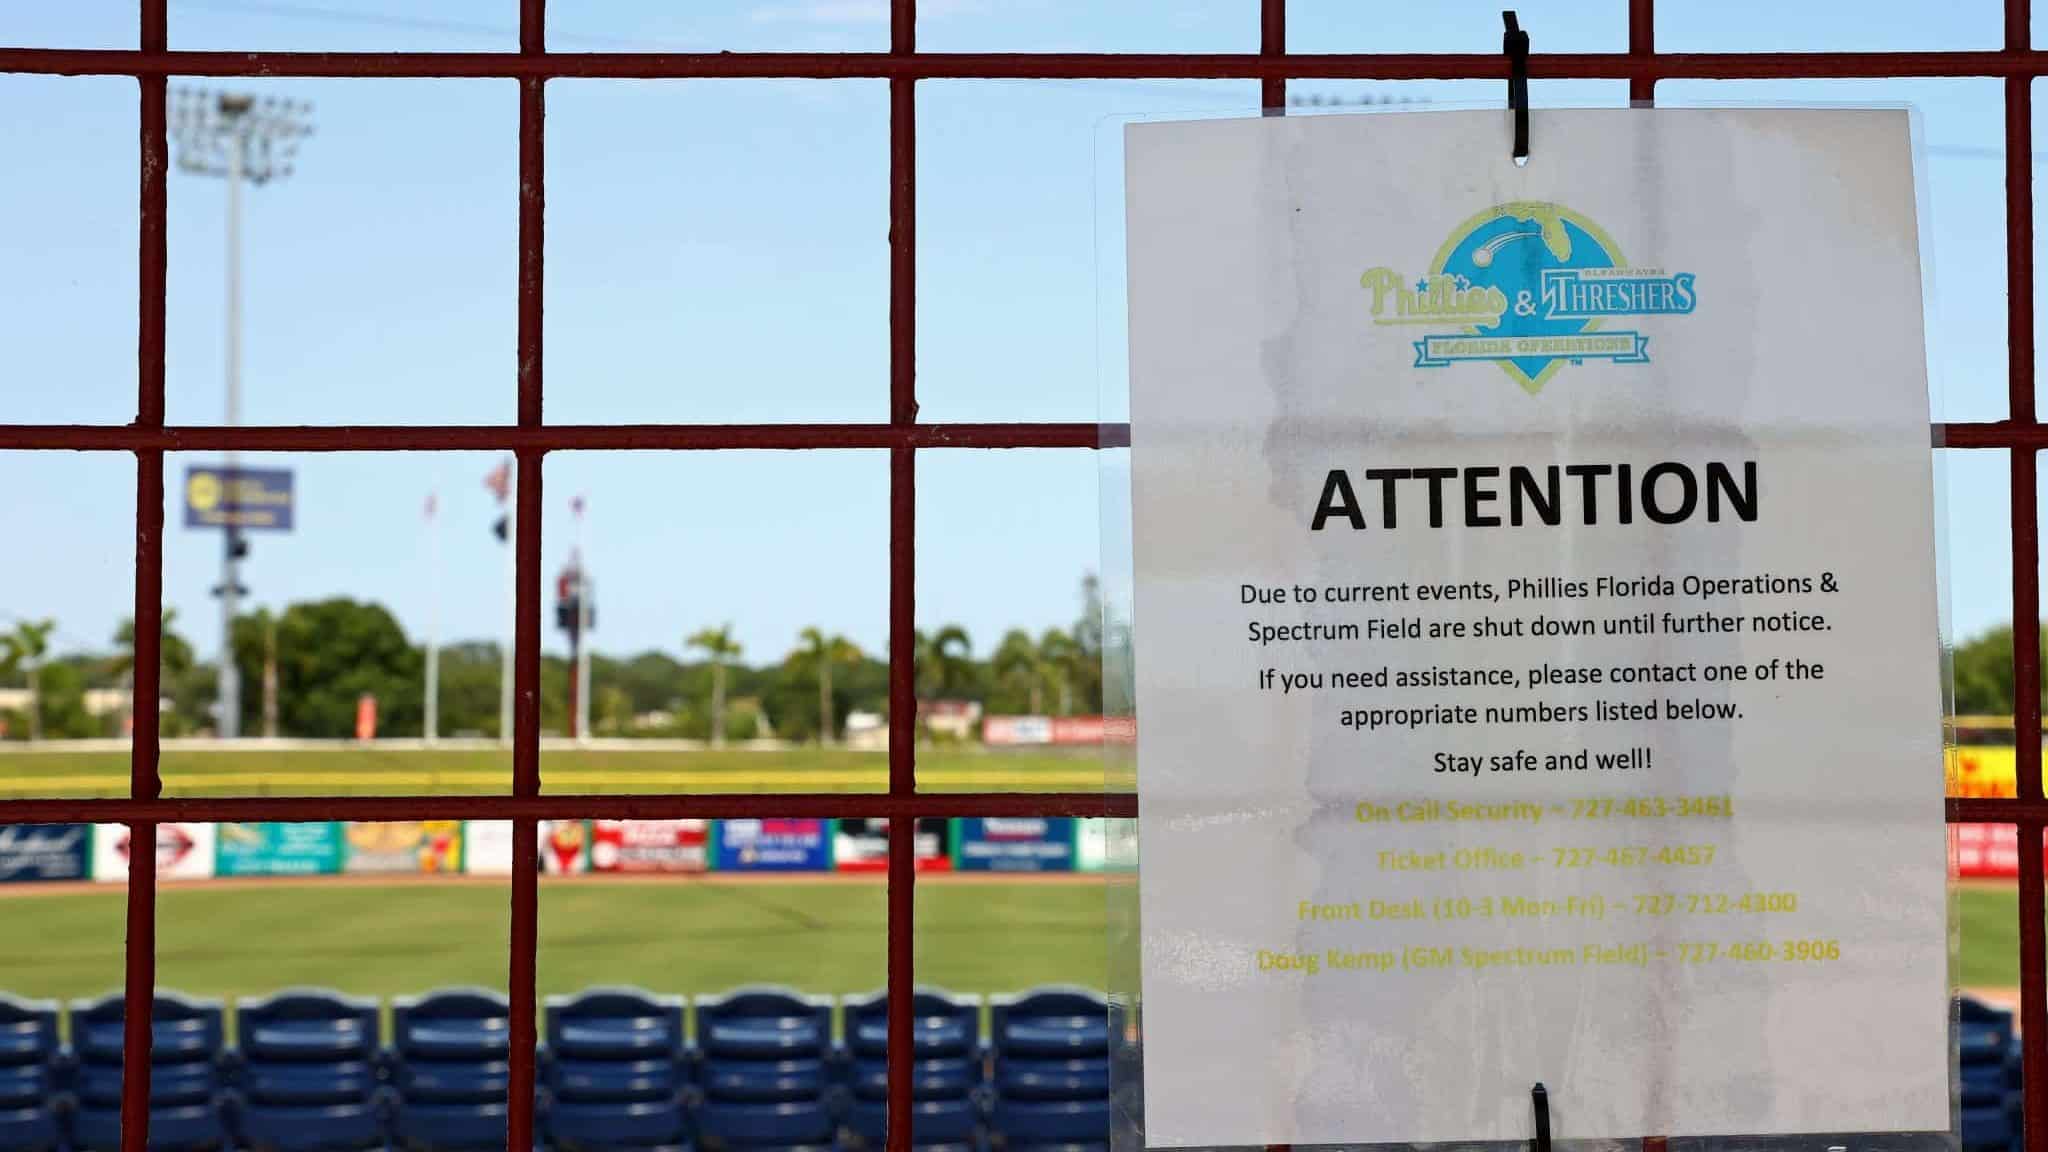 CLEARWATER, FLORIDA - MAY 20: A sign announces that Phillies Florida Operations and Spectrum Field, spring training home of the Philadelphia Phillies, have been shut down on May 20, 2020 in Clearwater, Florida. The Major League Baseball season remains postponed due to the COVID-19 pandemic.